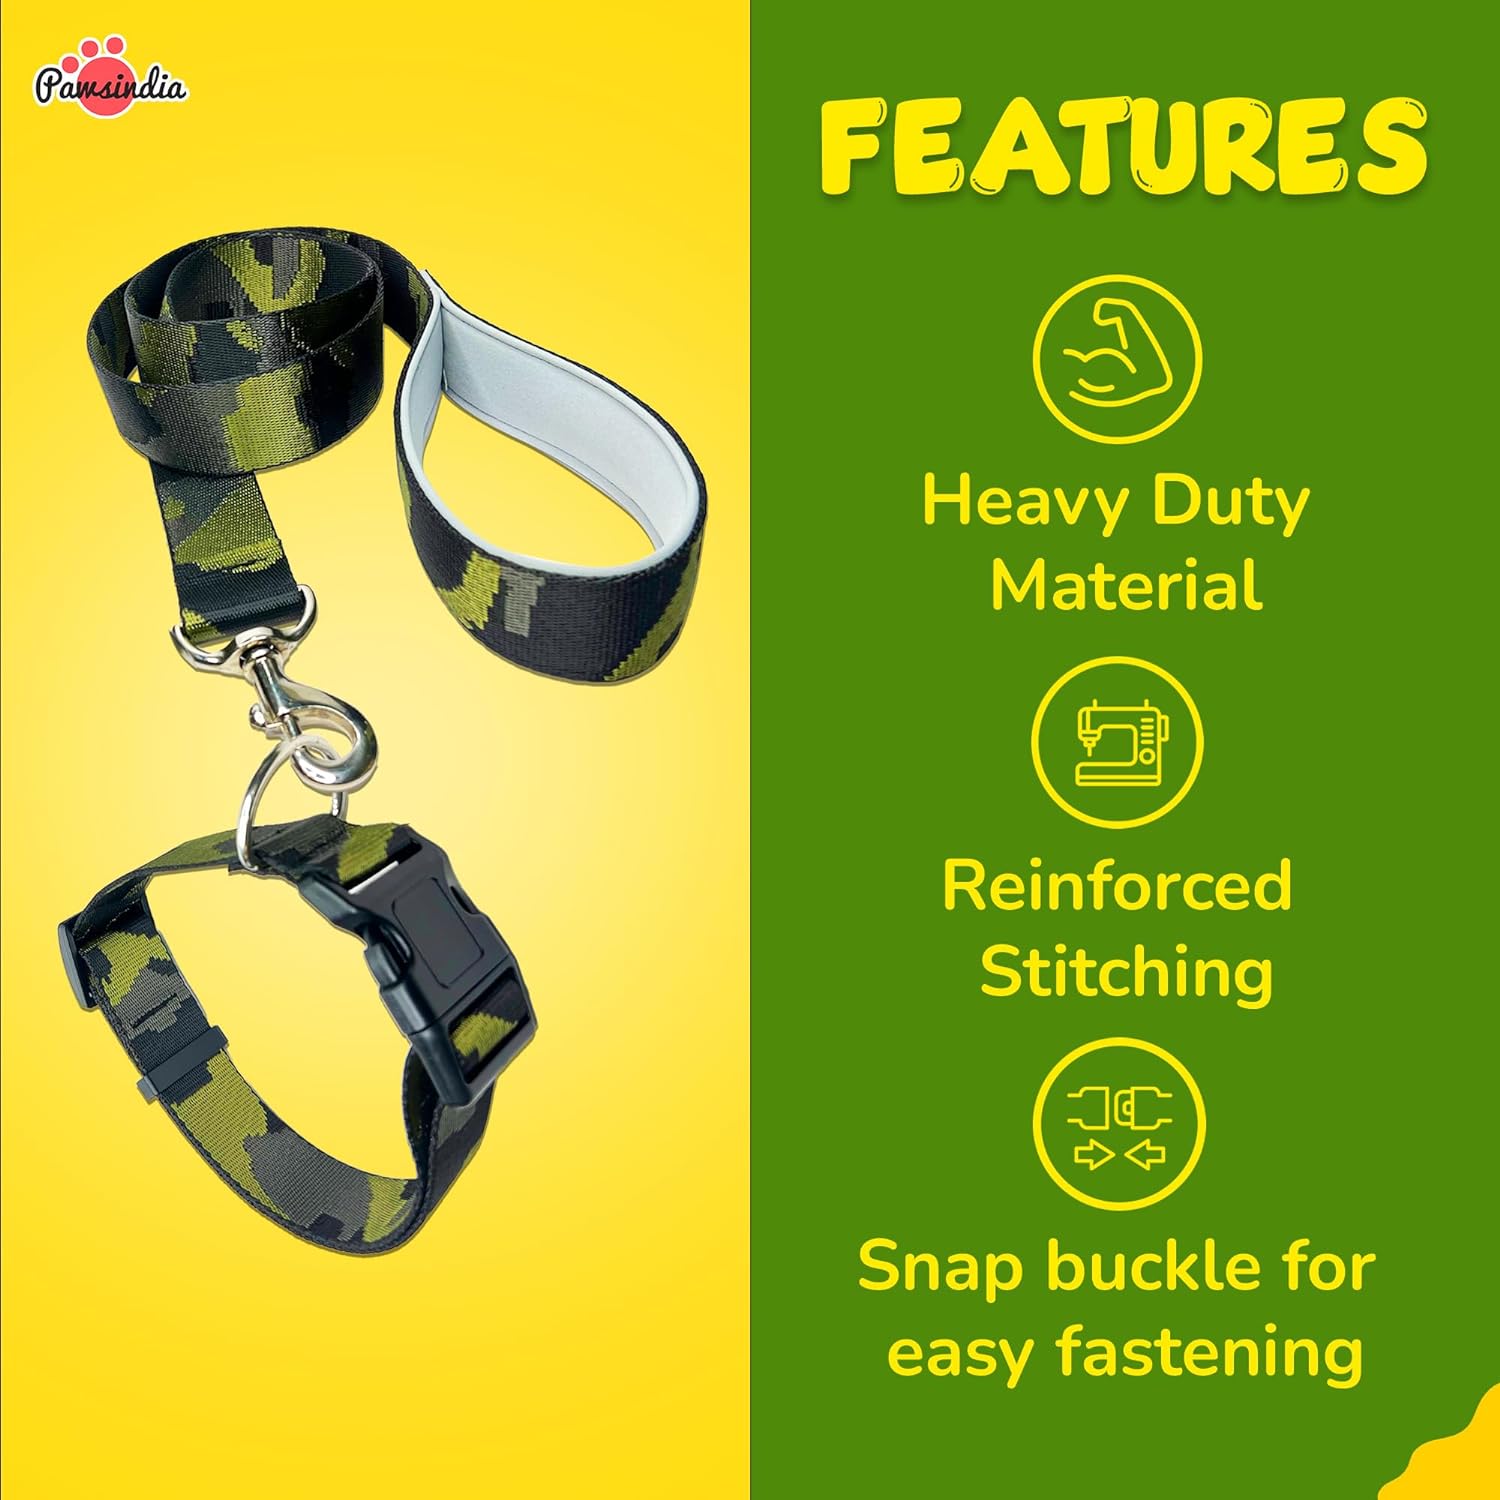 Pawsindia Army Collar & Leash set for Dogs - Large/ X-Large